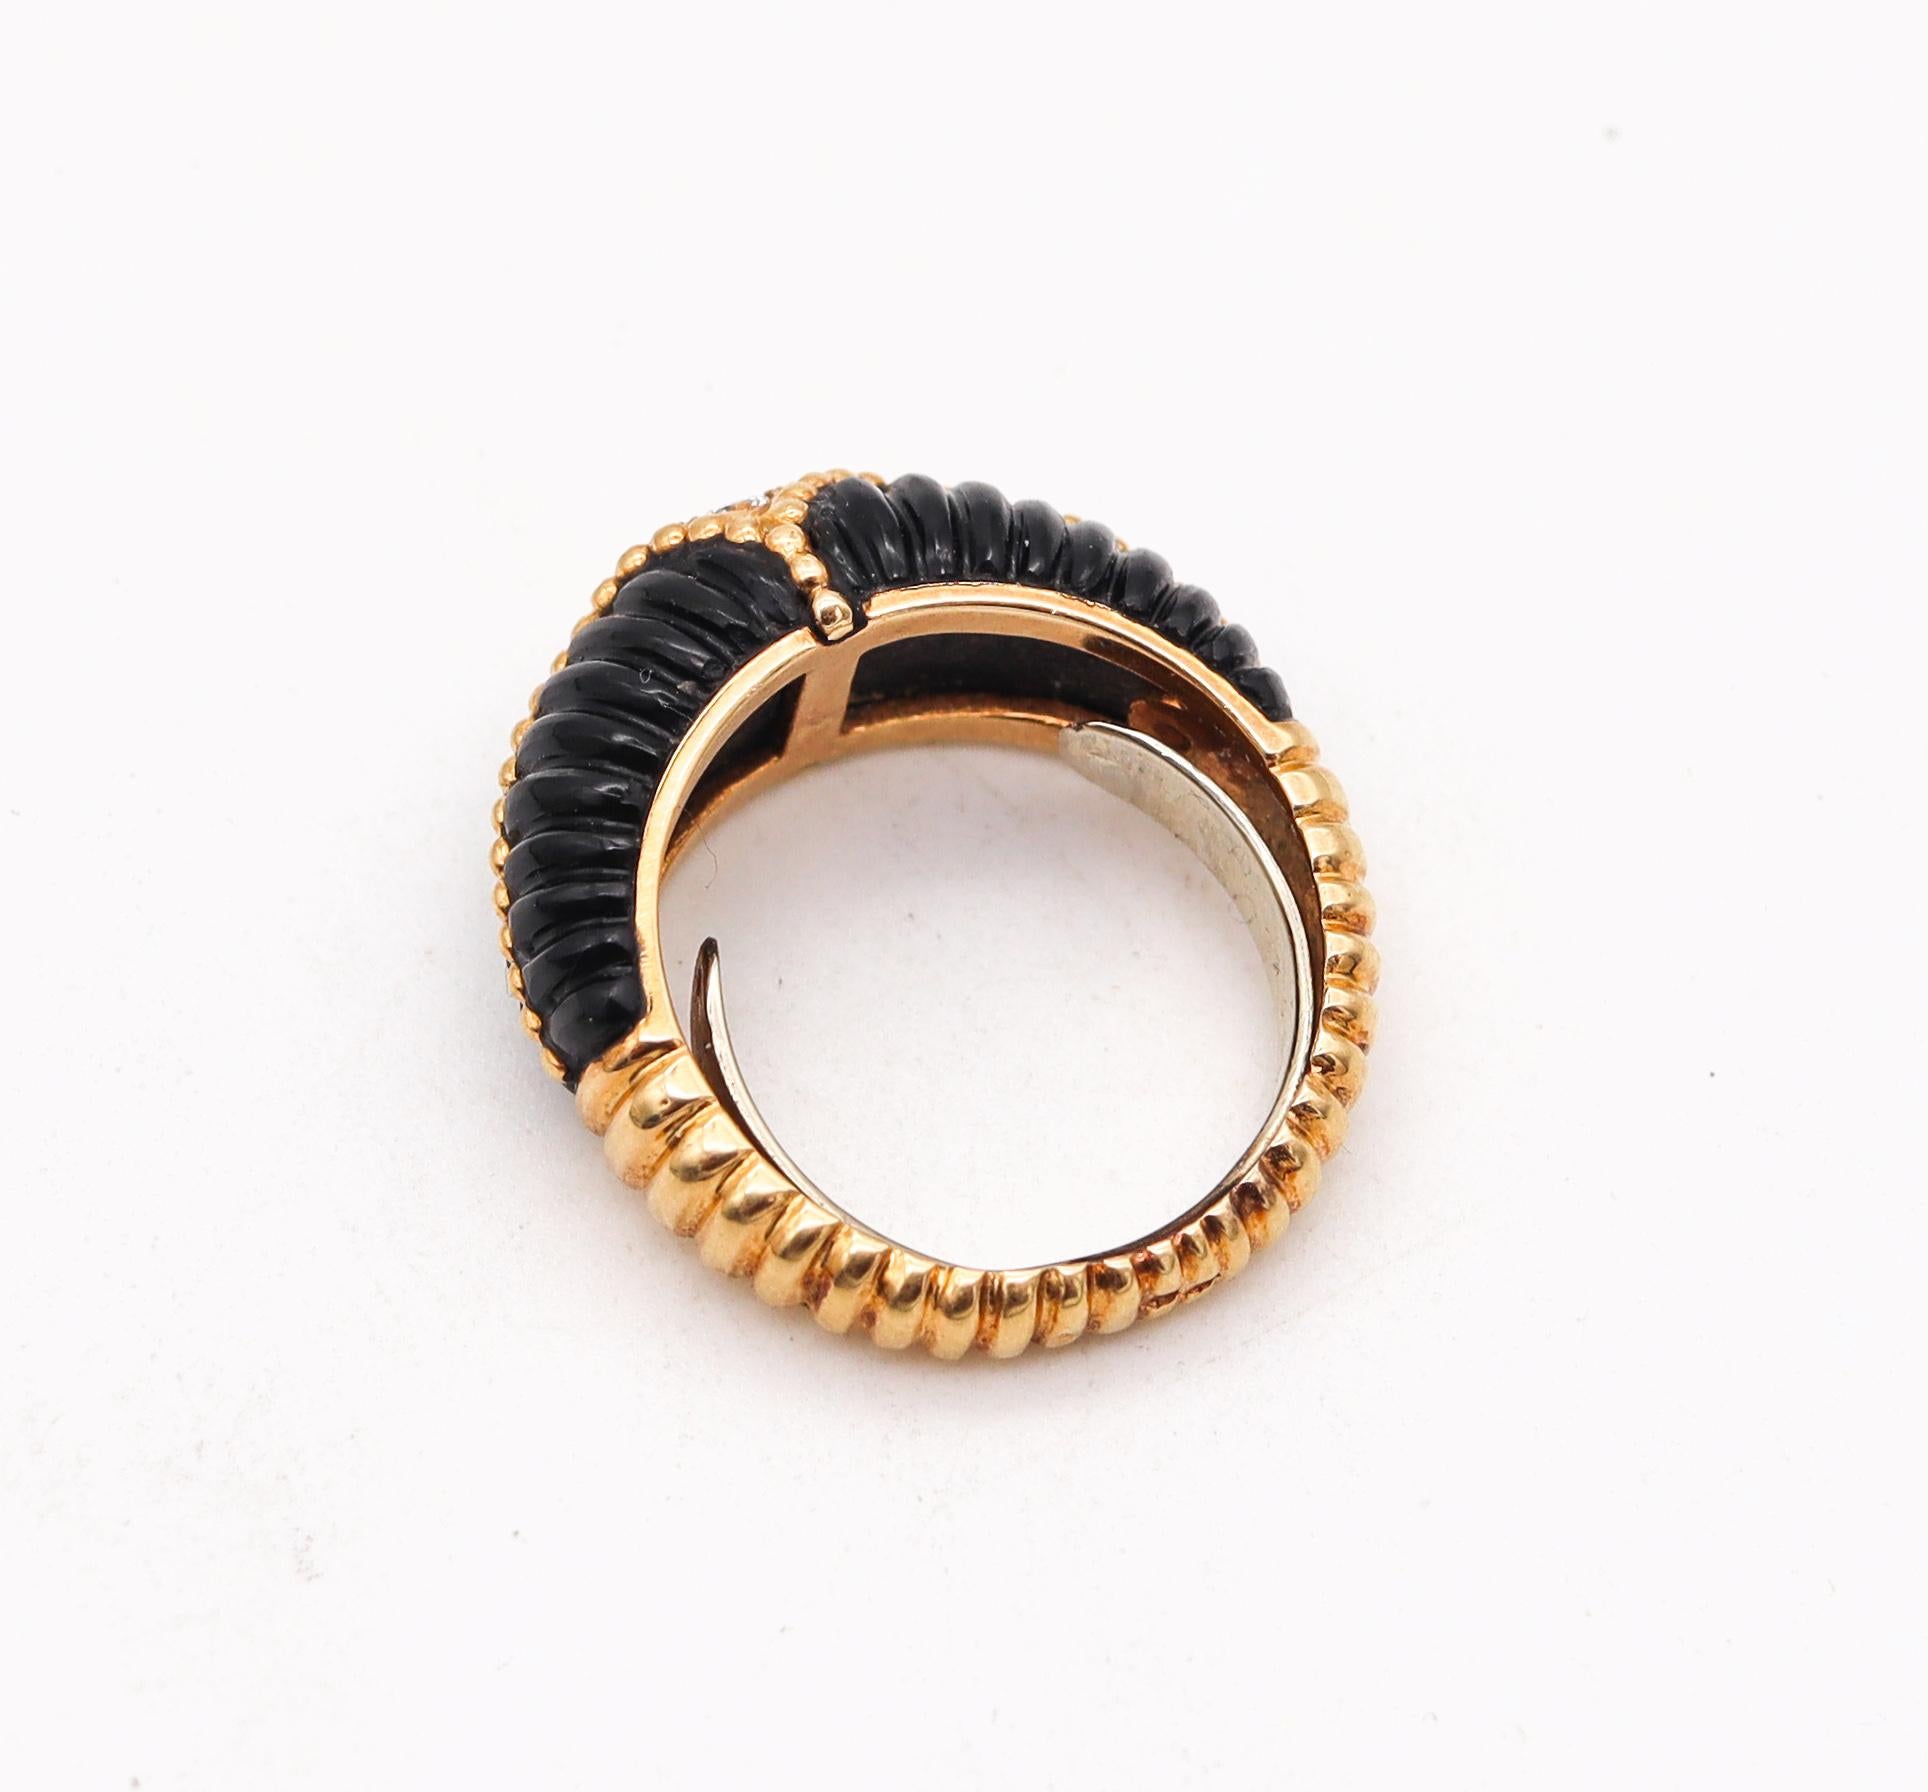 Modernist Van Cleef & Arpels 1970 Paris Fluted Onyx Ring in 18Kt Yellow Gold with Diamonds For Sale